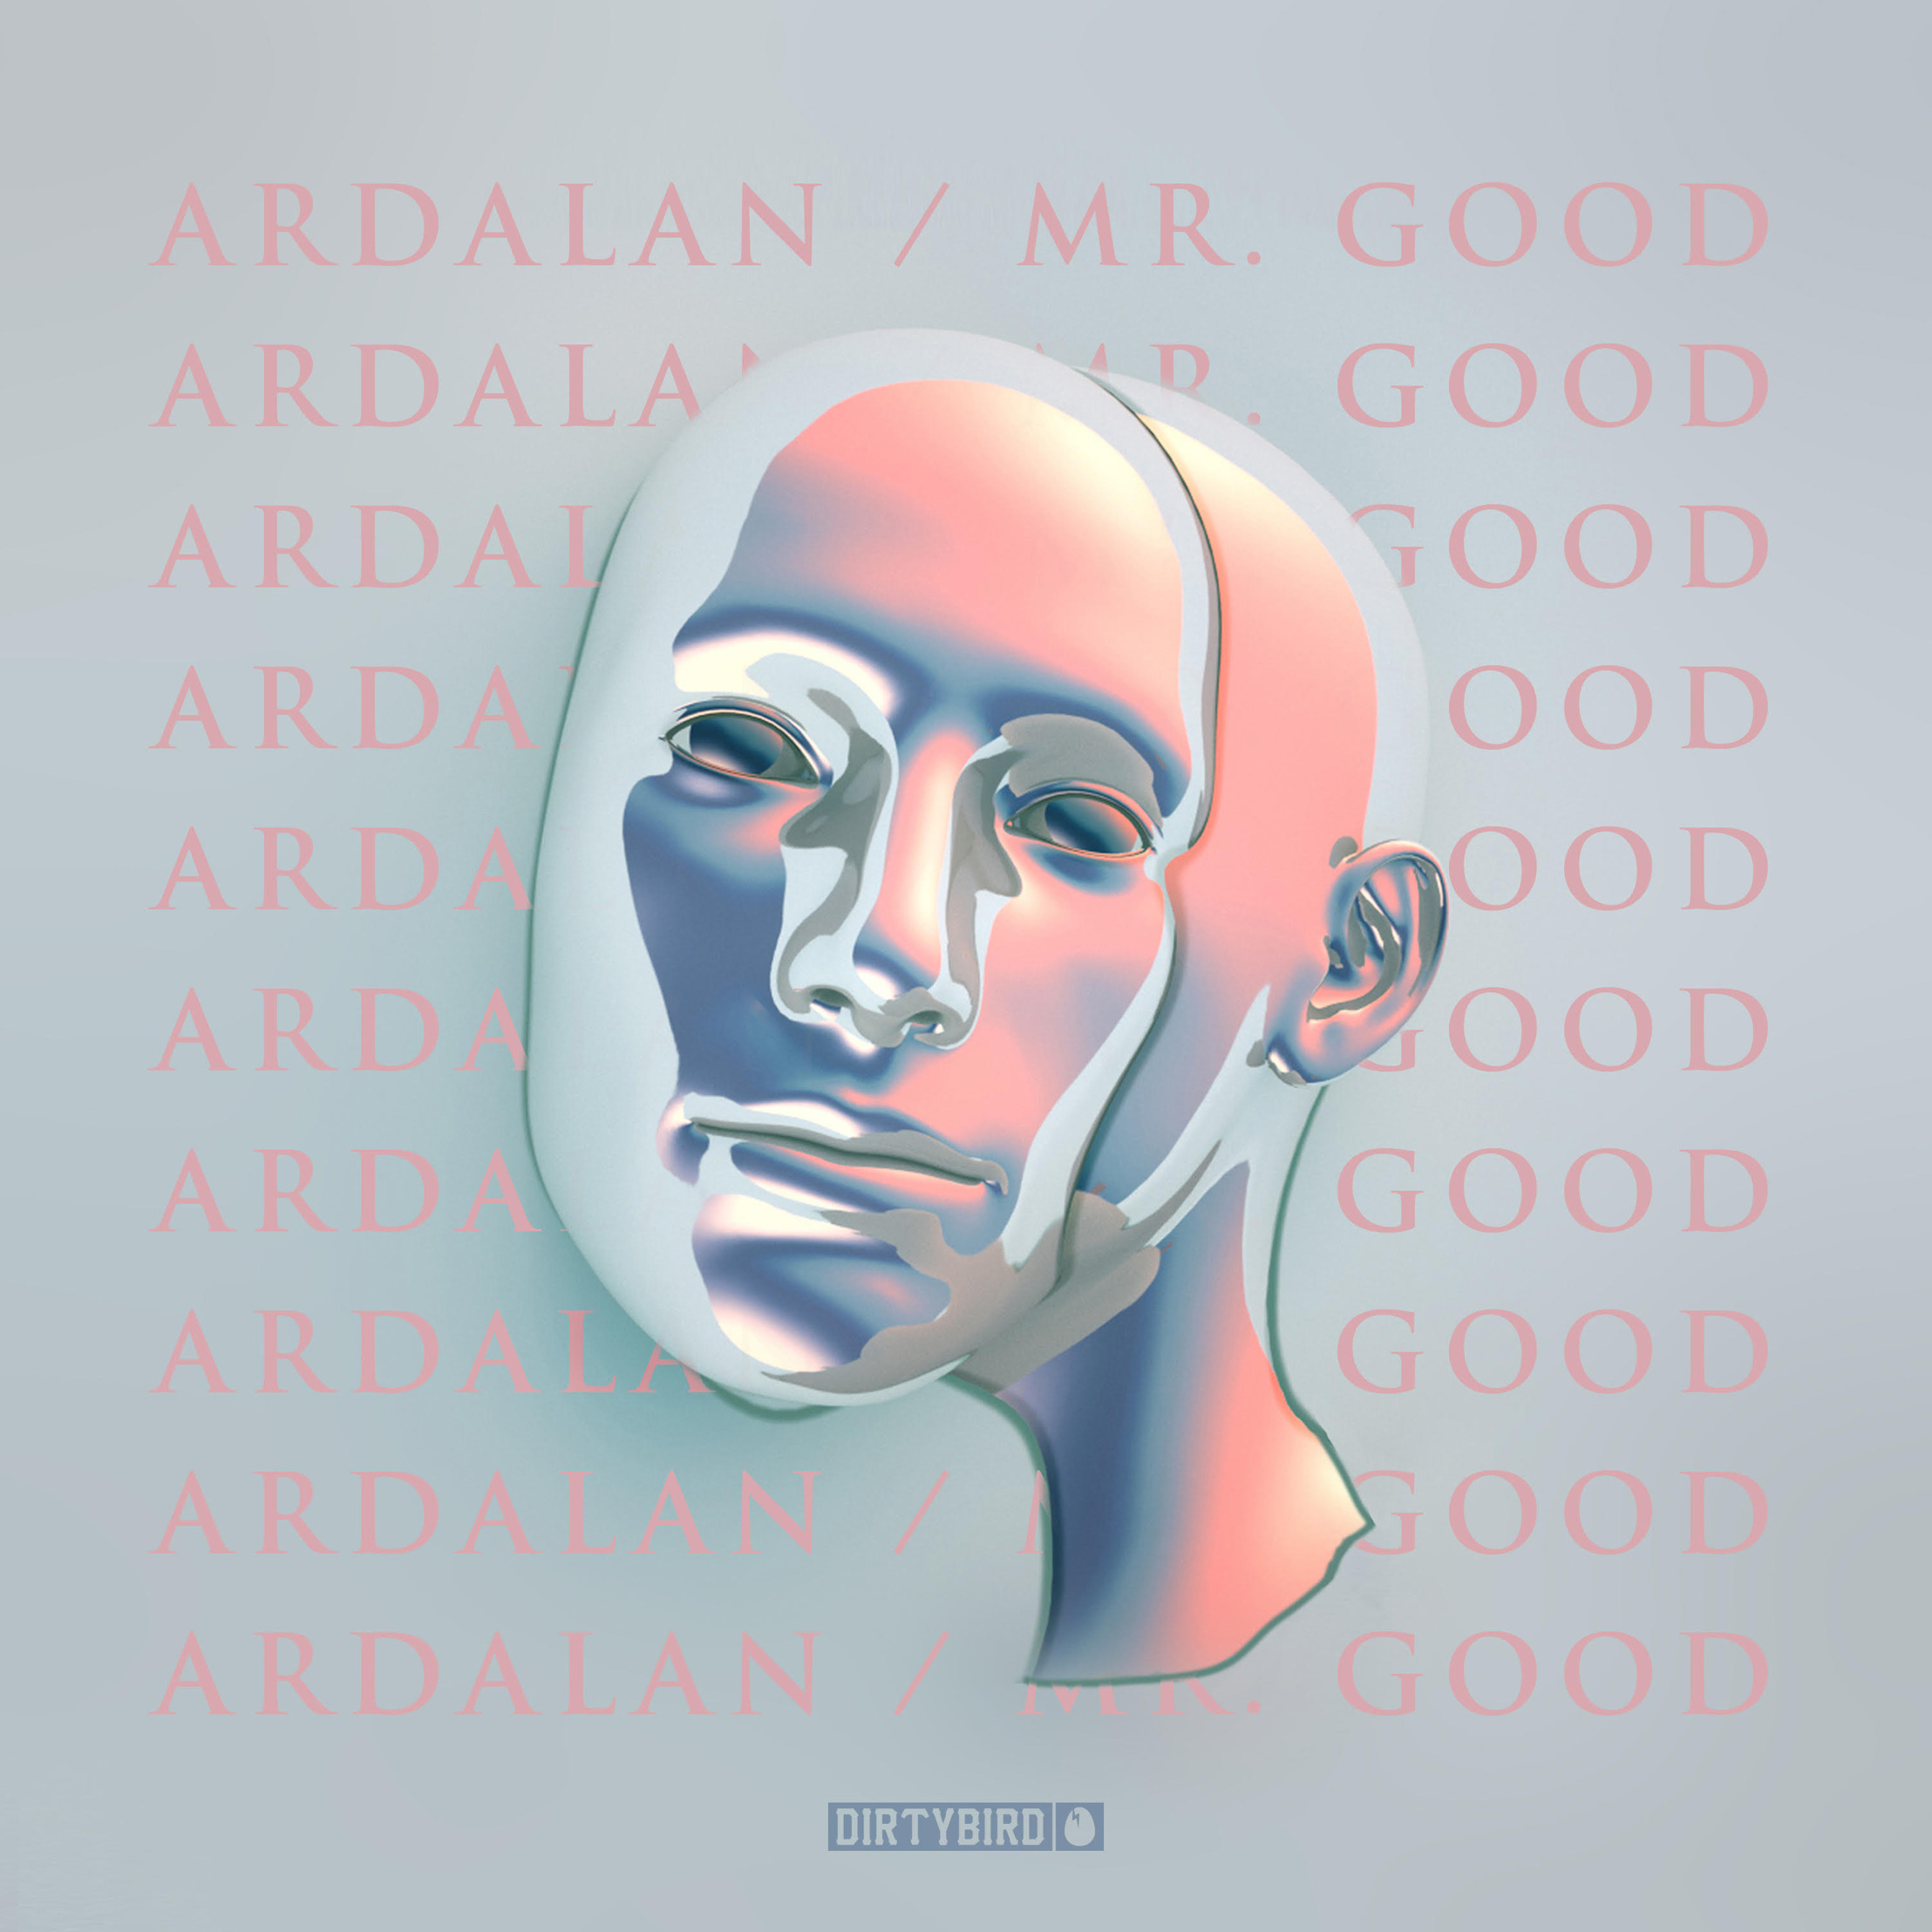 Ardalan’s ‘Mr. Good’ LP out now on DIRTYBIRD Records